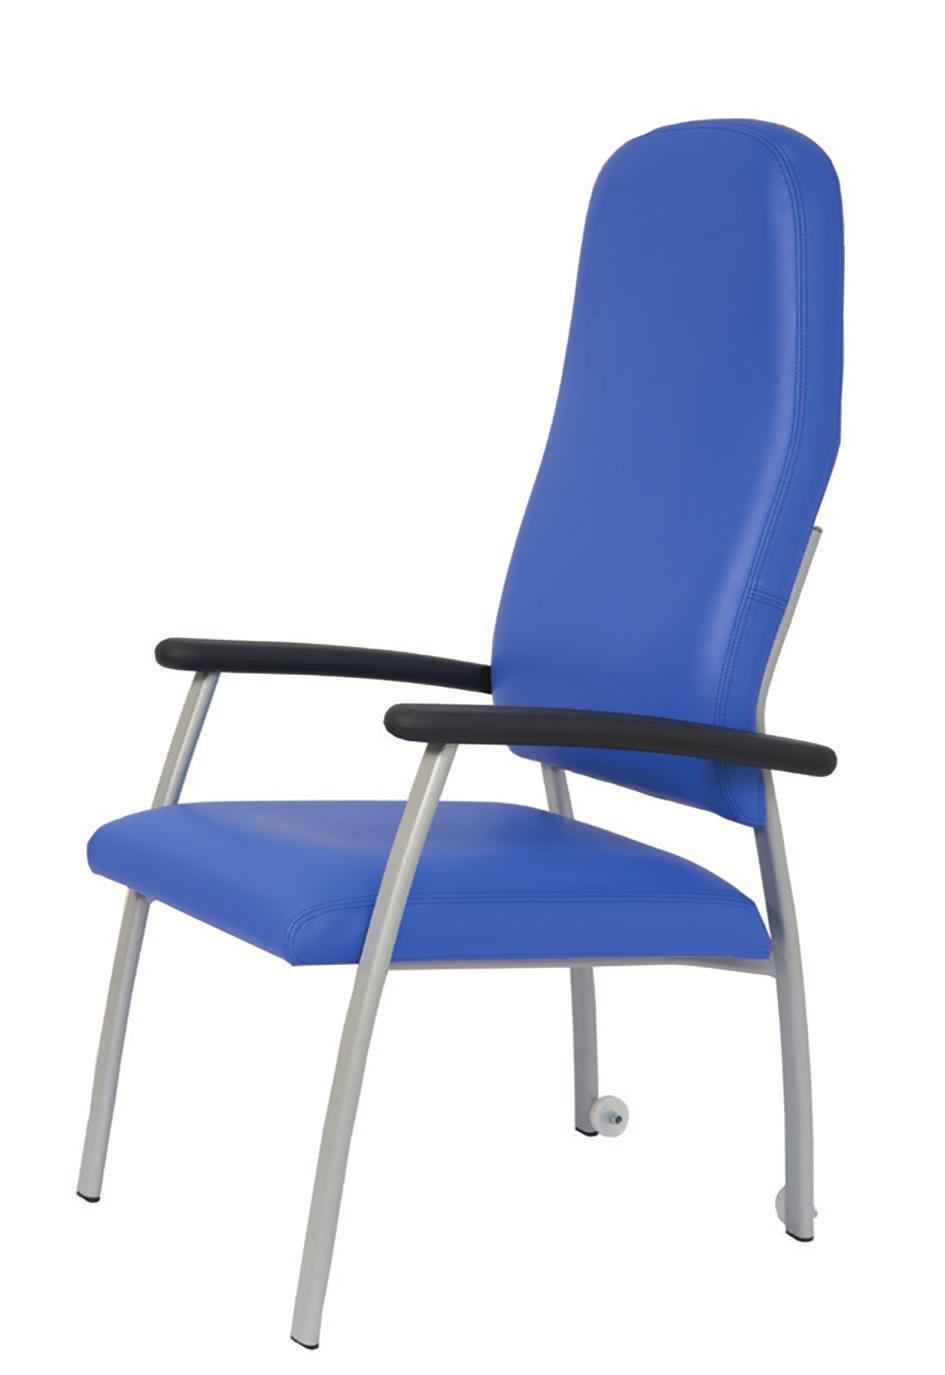 PATIENT SEATING Arvada Our Arvada chair is a popular choice for bedside seating.